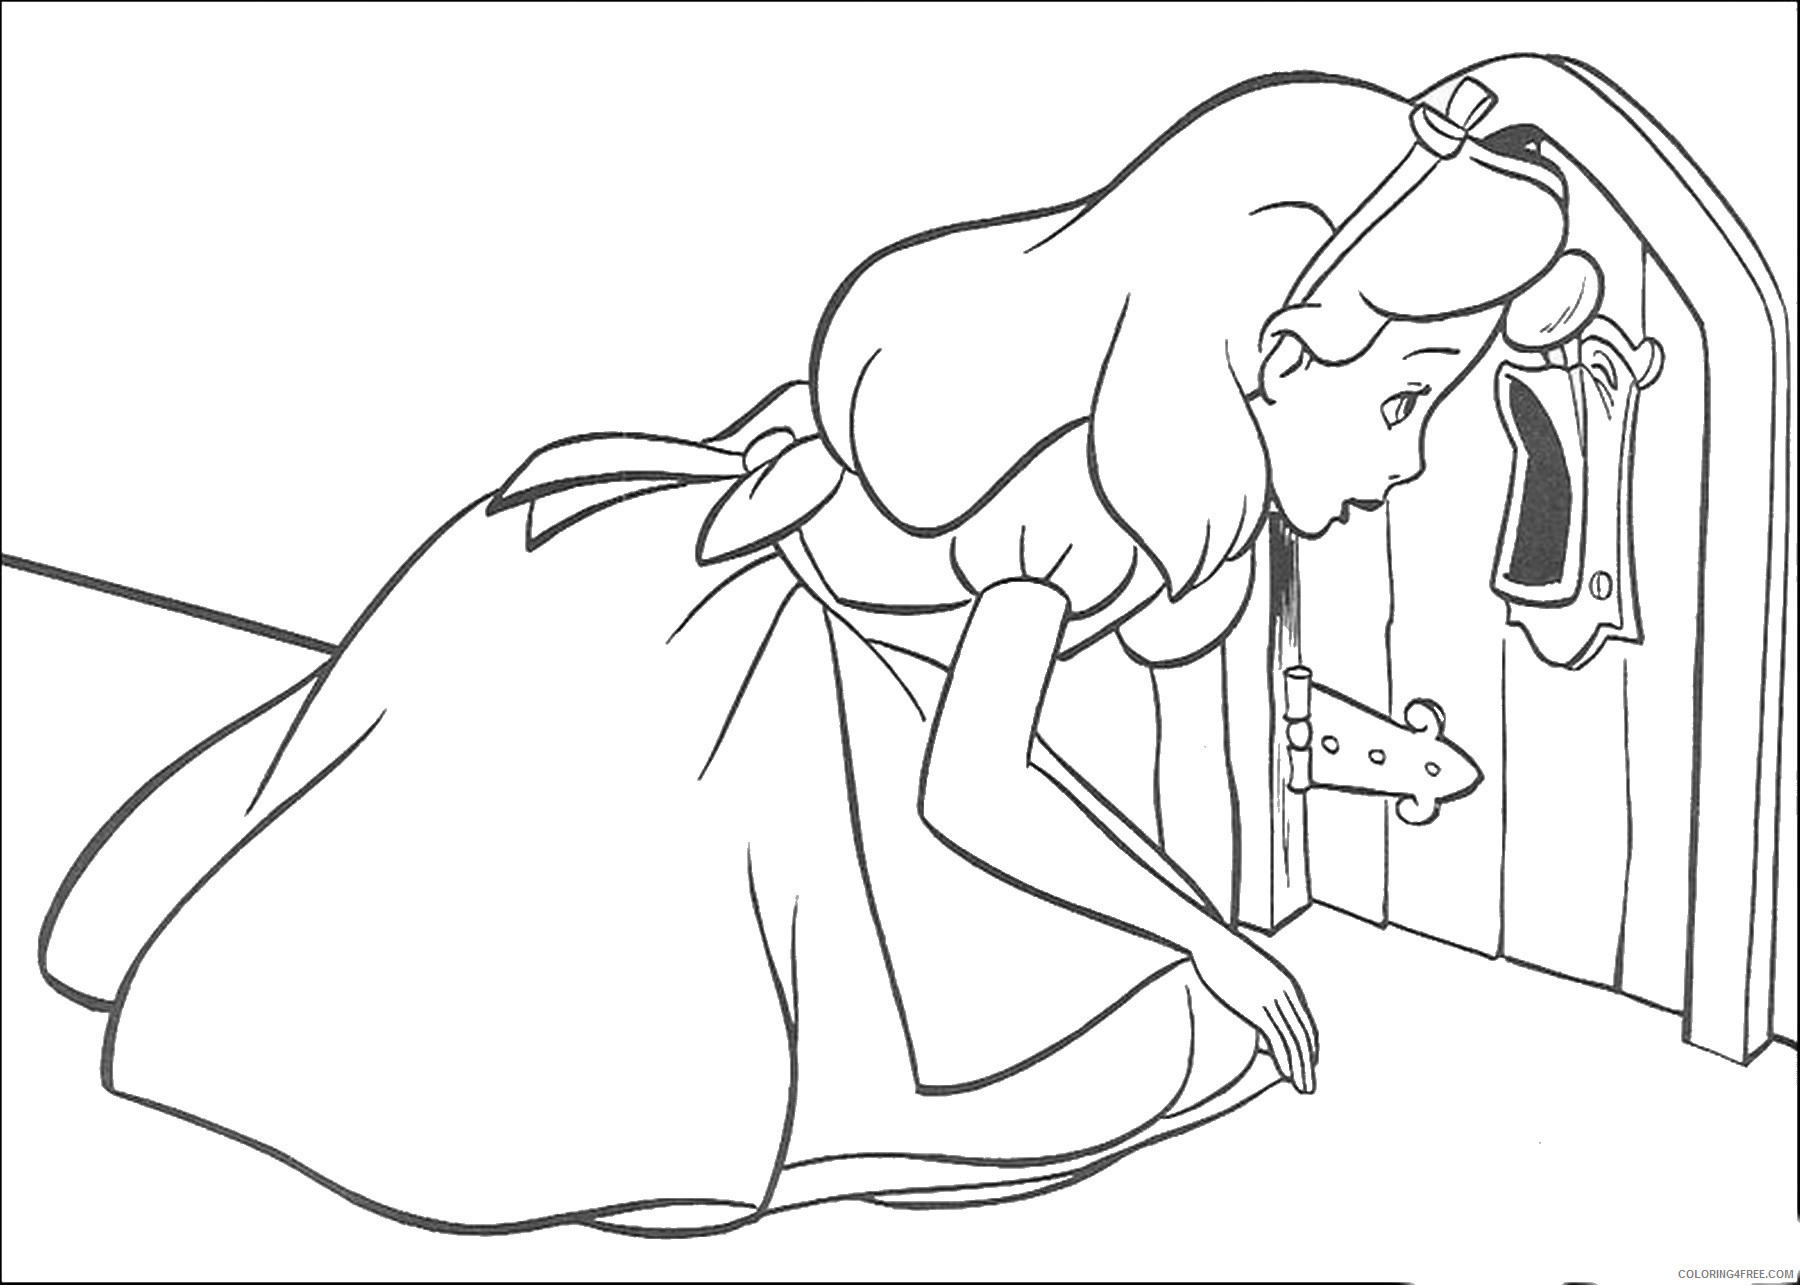 Alice in Wonderland Coloring Pages Cartoons alice_14 Printable 2020 0354 Coloring4free